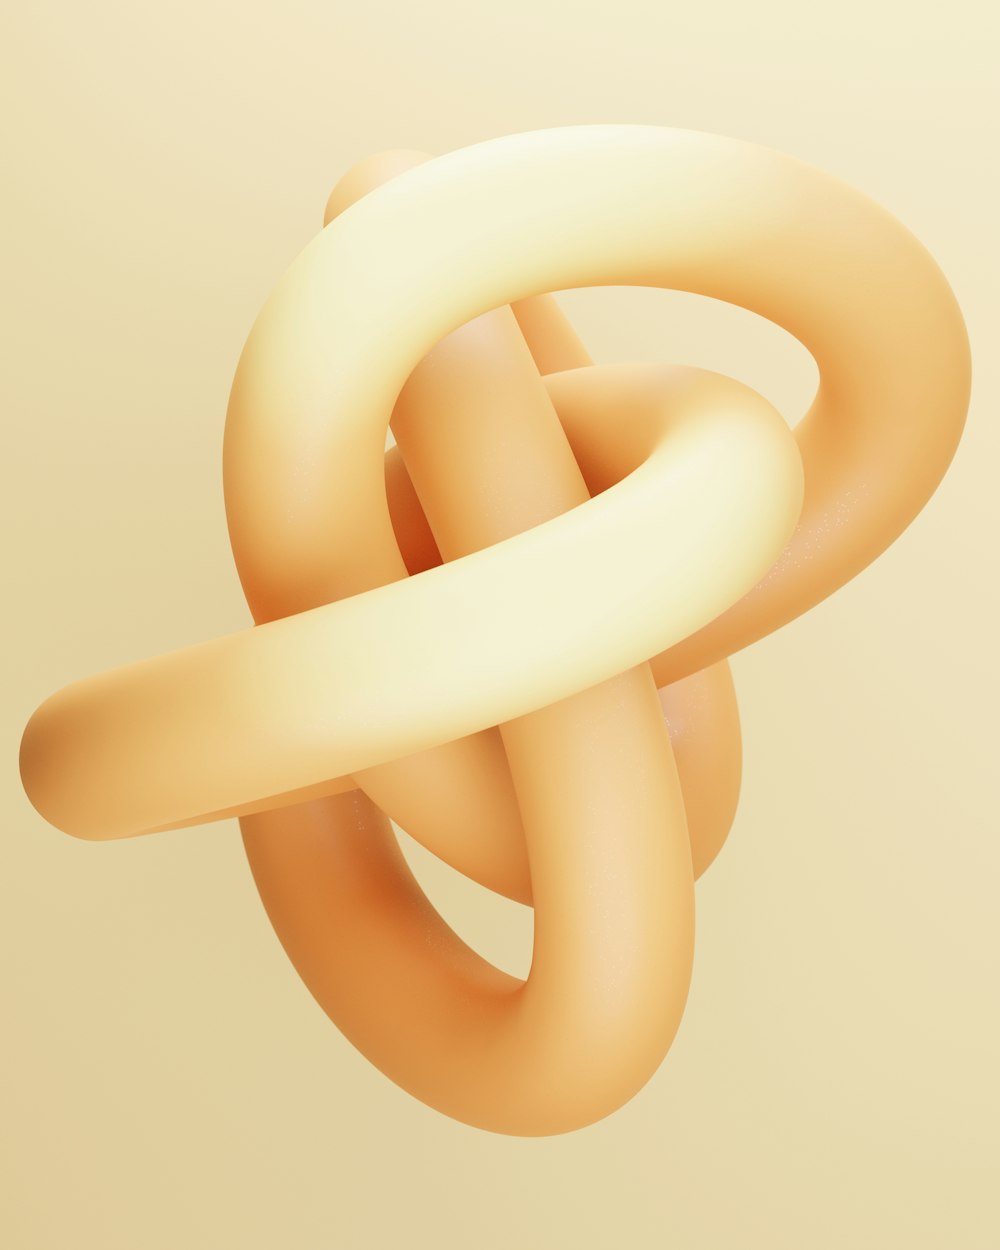 an abstract image of a knot in the shape of a circle